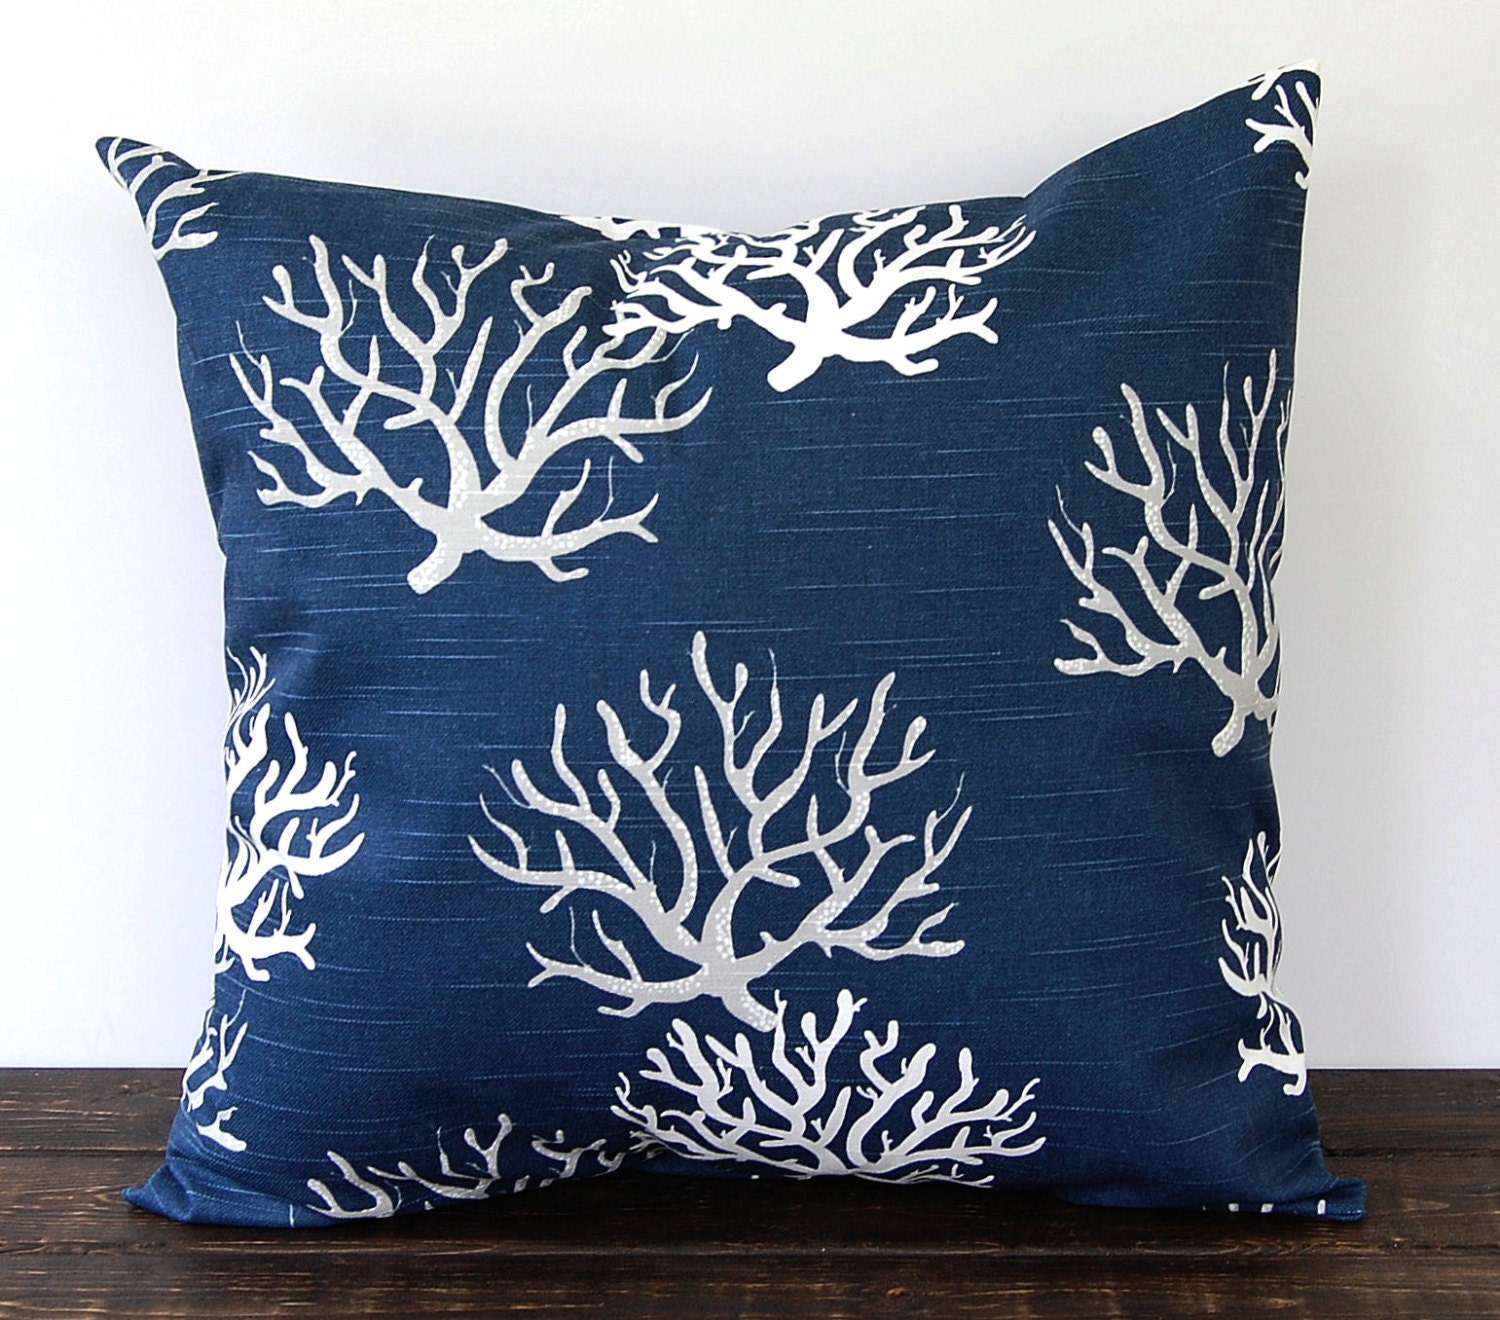 Popular items for anchor pillow on Etsy